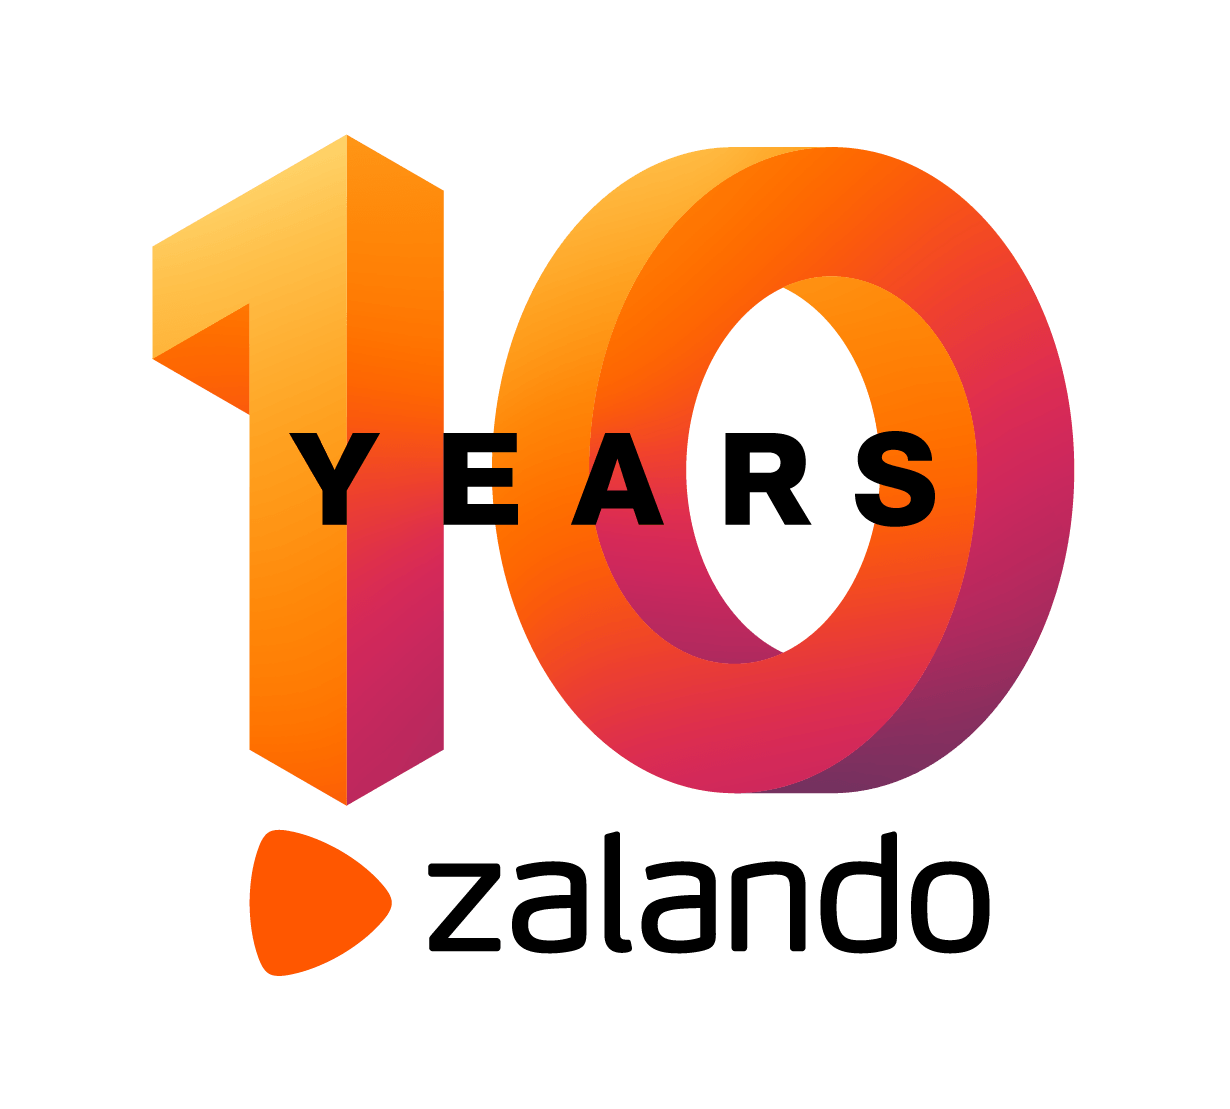 10th Anniversary Edition Logo - Create a special edition logo for 10th Anniversary FOSSASIA · Issue ...